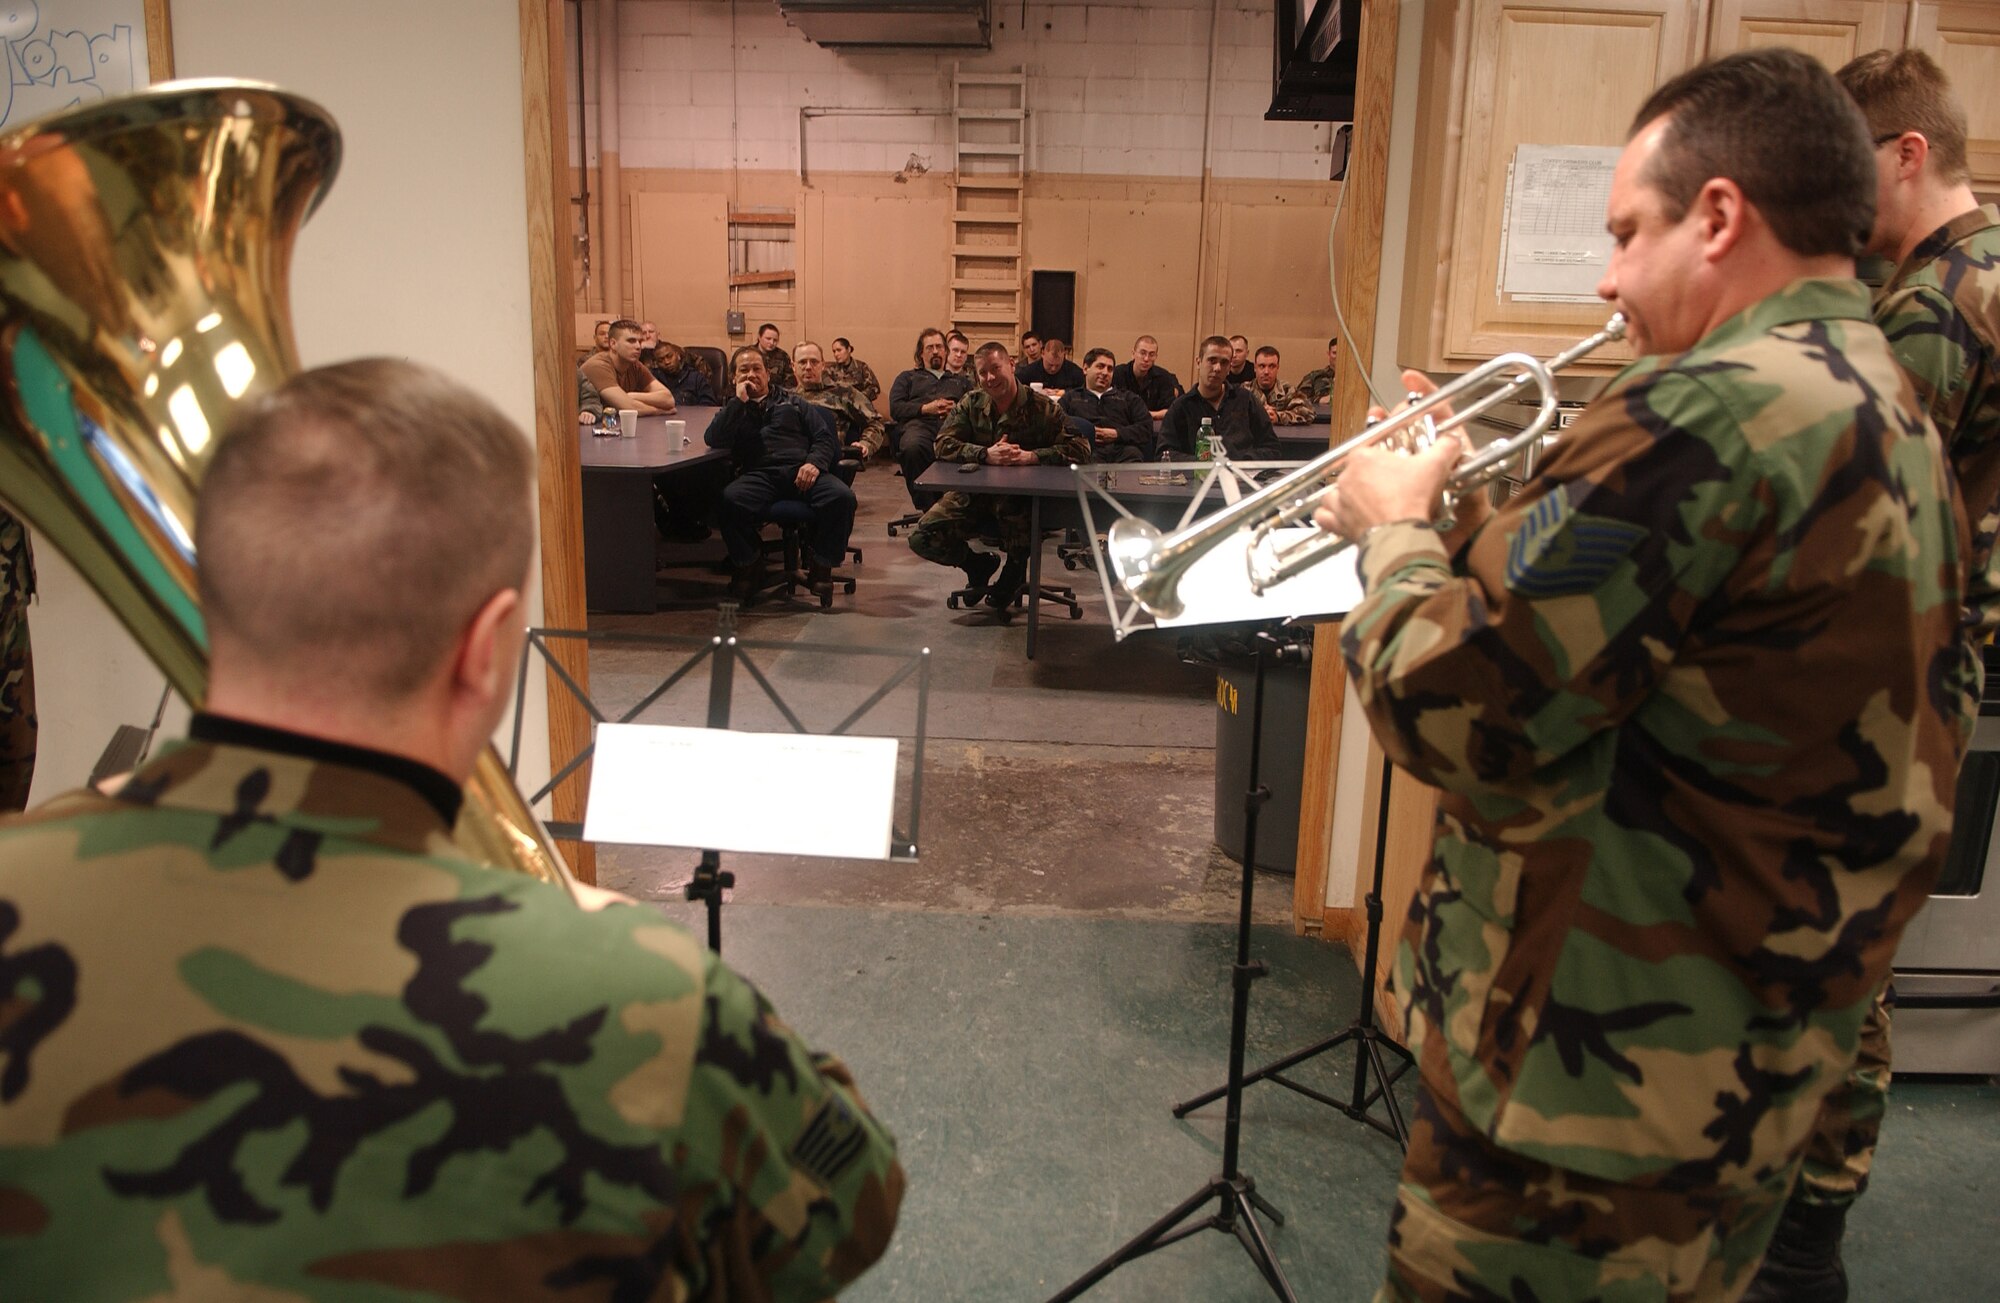 EIELSON AIR FORCE BASE, Alaska -- Members of the PACAF Alaska Brass Quintet play "Holiday favorites" here Dec. 6 at the 354th Logisitics Readiness Squadron. 354th Fighter Wing, Eielson Air Force Base, Alaska.(U.S. Air Force photo by Senior Airman Anthony Nelson.)
